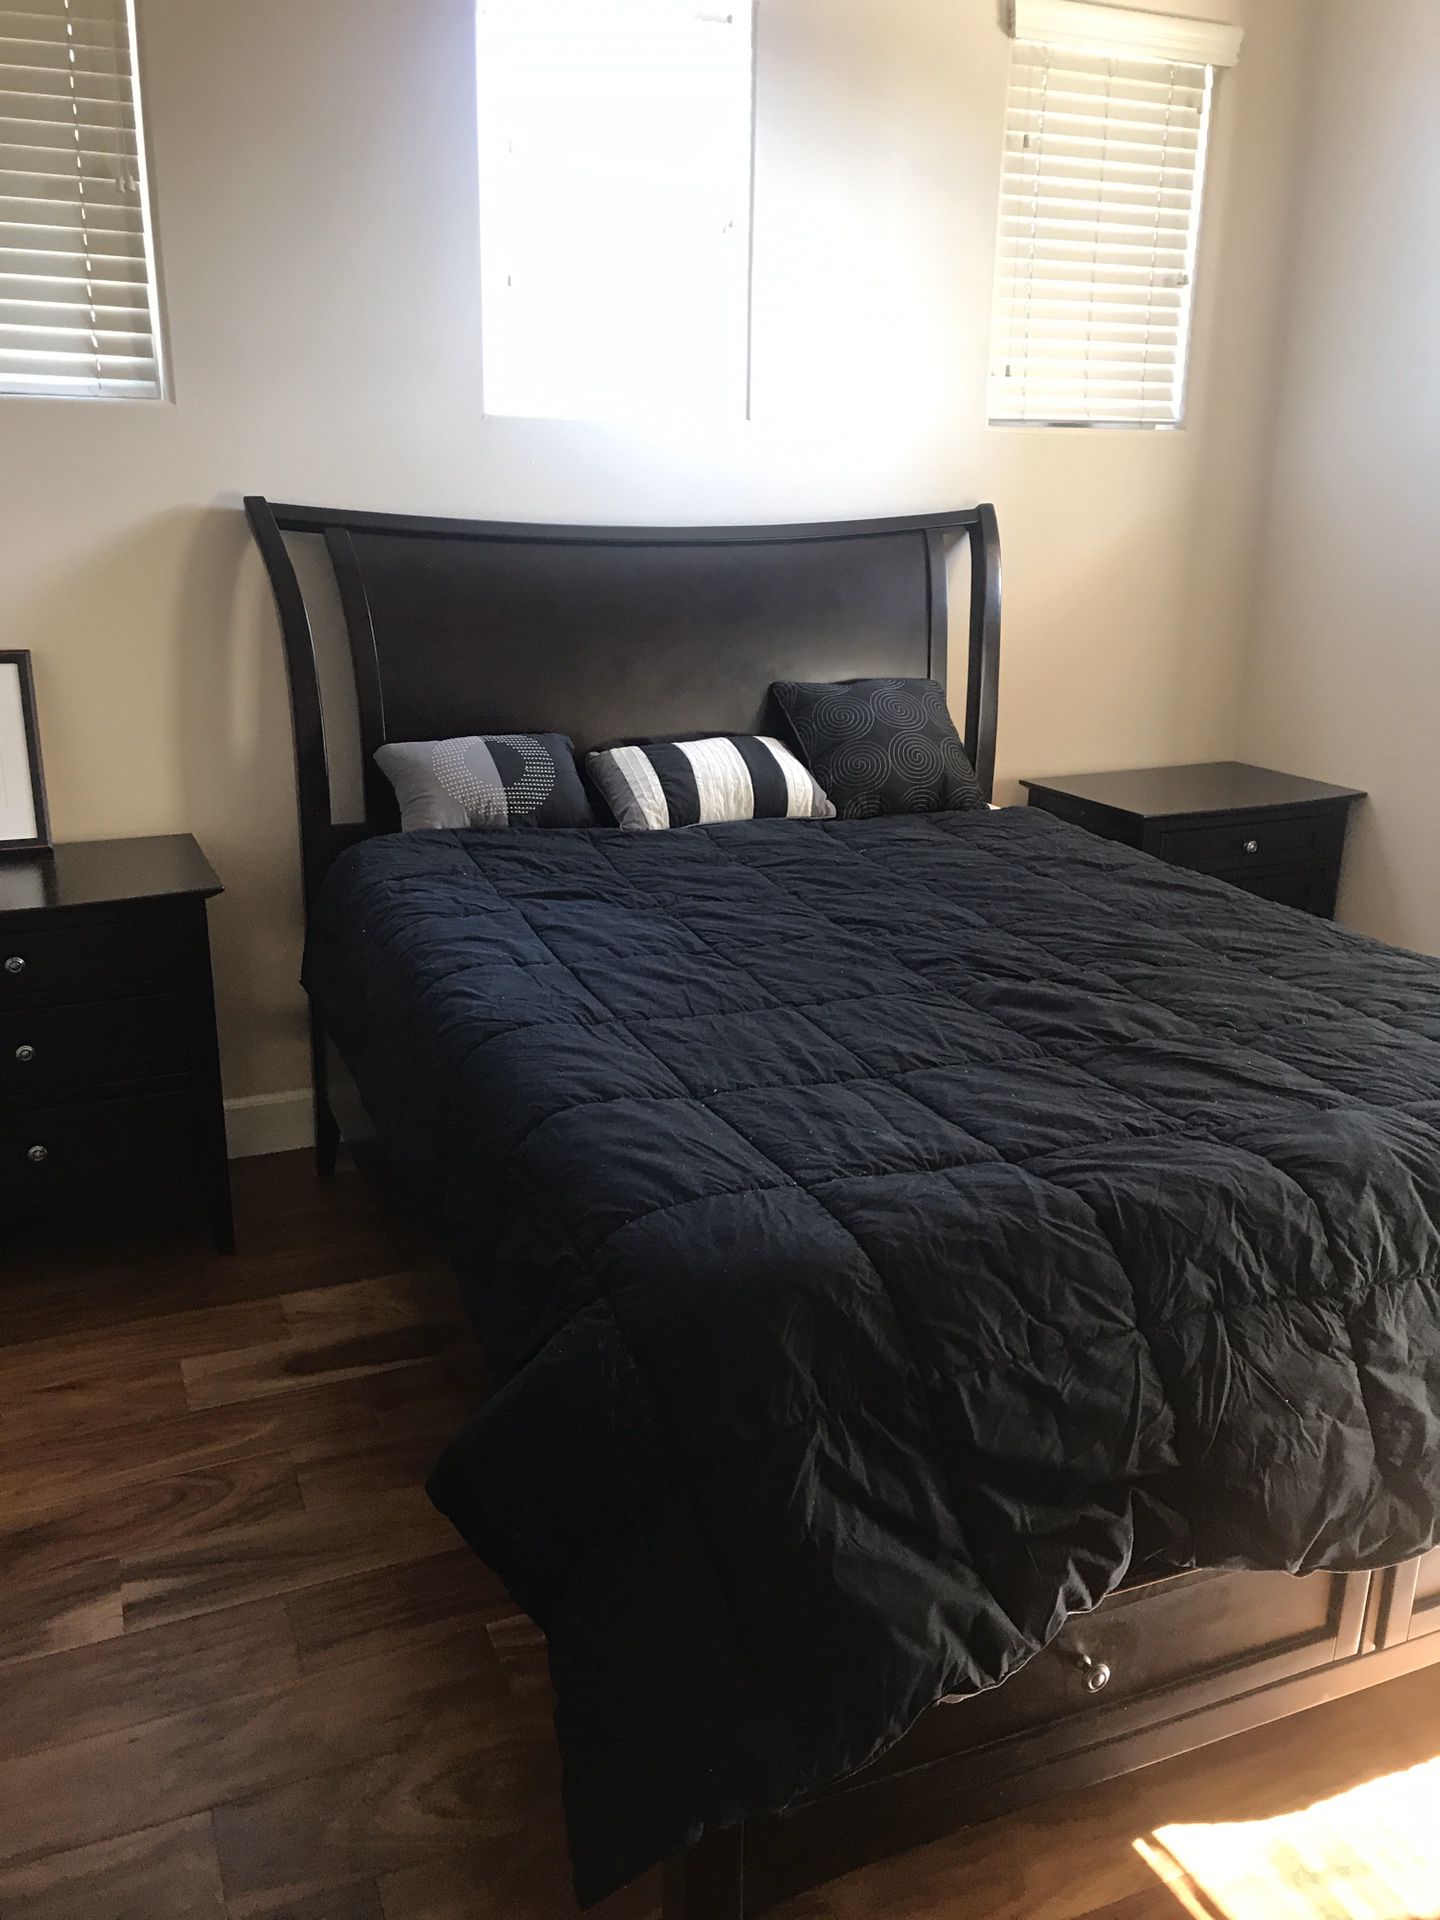 Queen bed, end tables, dresser with mirror, dresser - like new, less than three years old